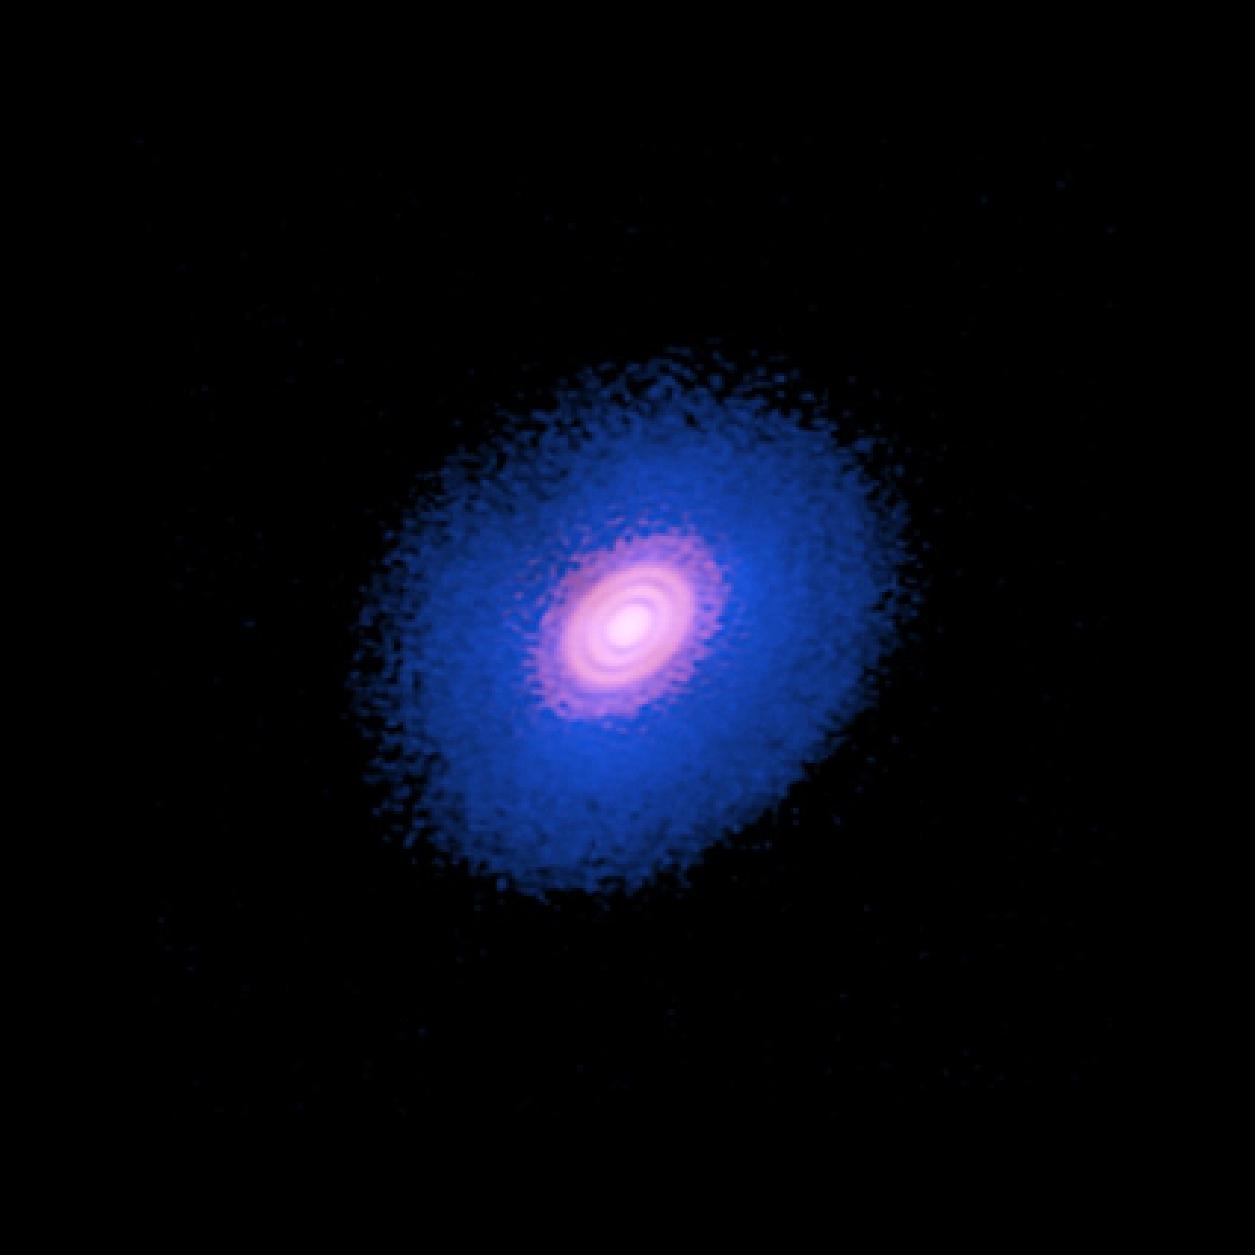 Figure 44: Composite image of the protoplanetary disk surrounding the young star HD 163296. The inner red area shows the dust of the protoplanetary disk. The broader blue disk is the carbon monoxide gas in the system. ALMA observed that in the outer two gaps in the dust, there was a significant dip in the concentration of carbon monoxide, suggesting two planets are forming there [image credit: ALMA (ESO/NAOJ/NRAO); A. Isella; B. Saxton (NRAO/AUI/NSF)]